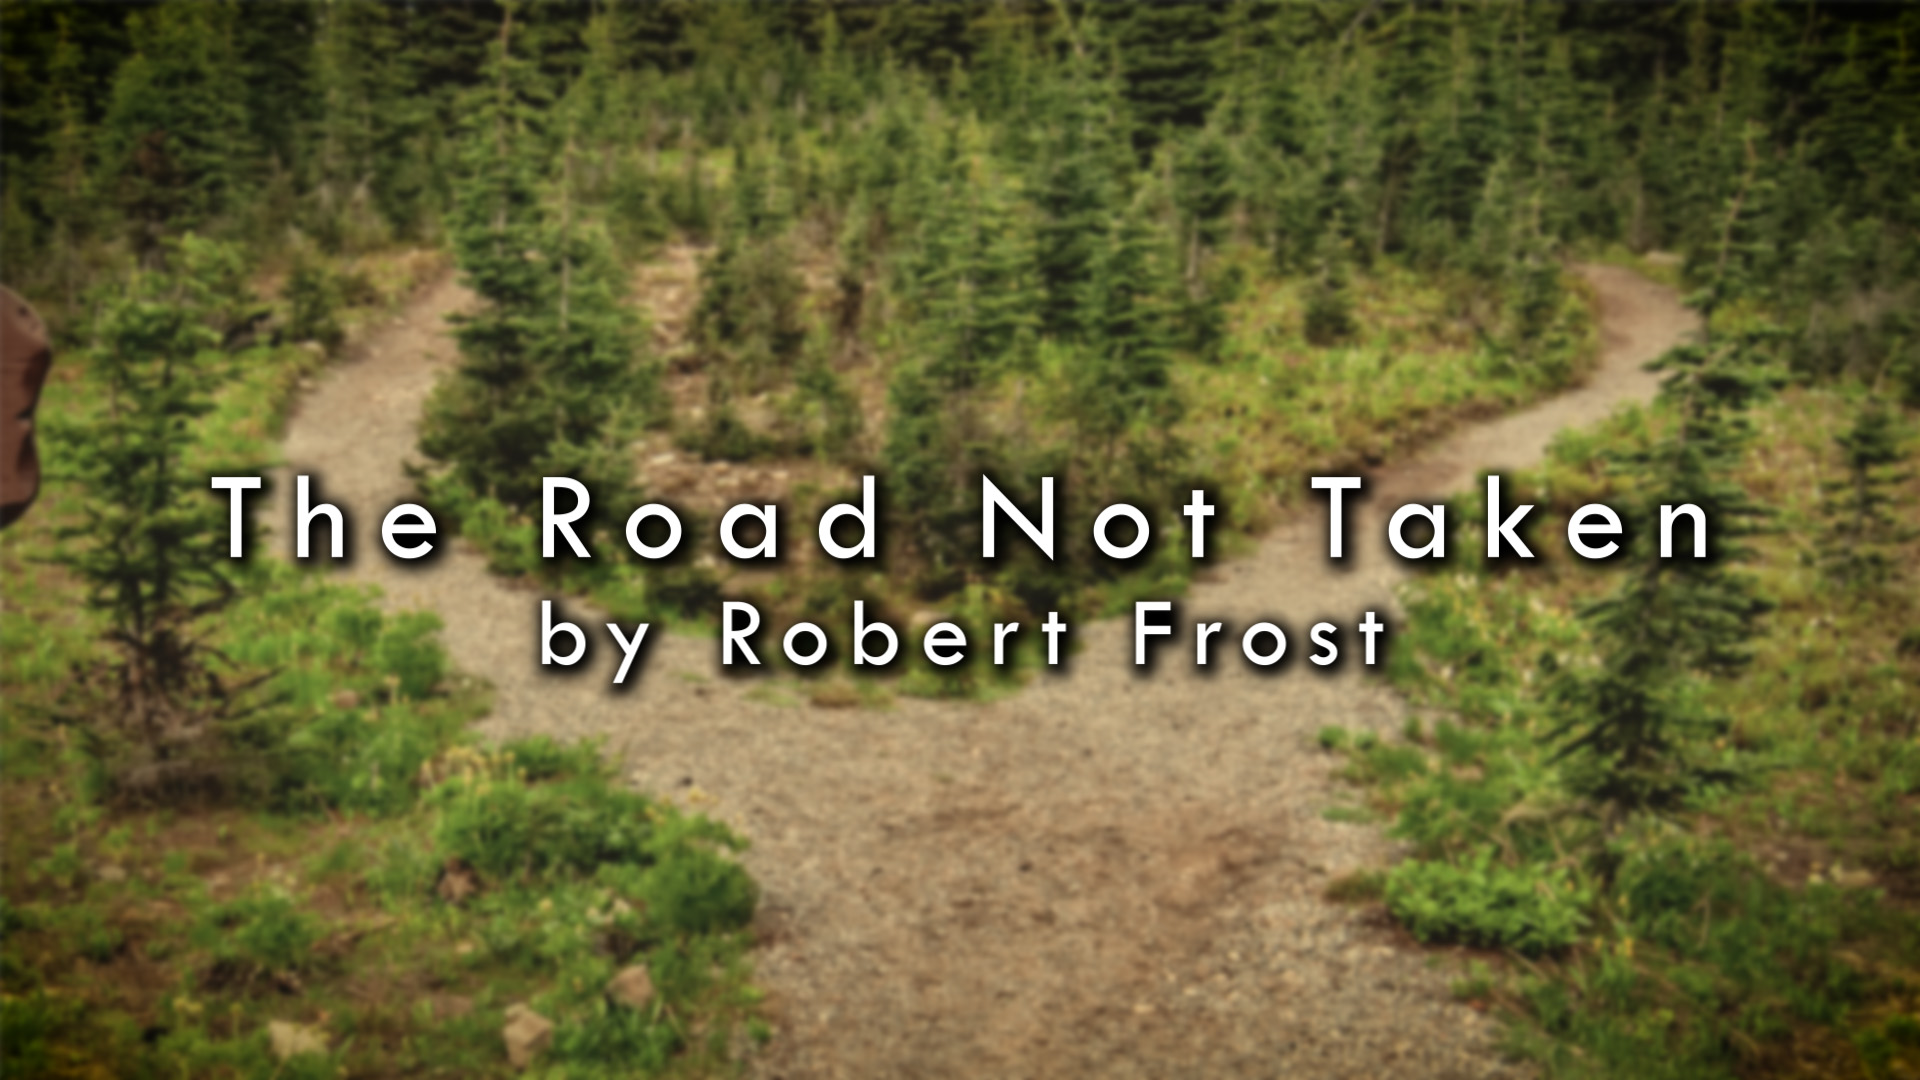 The Road Not Taken by Robert Frost, read by Zack Lawrence